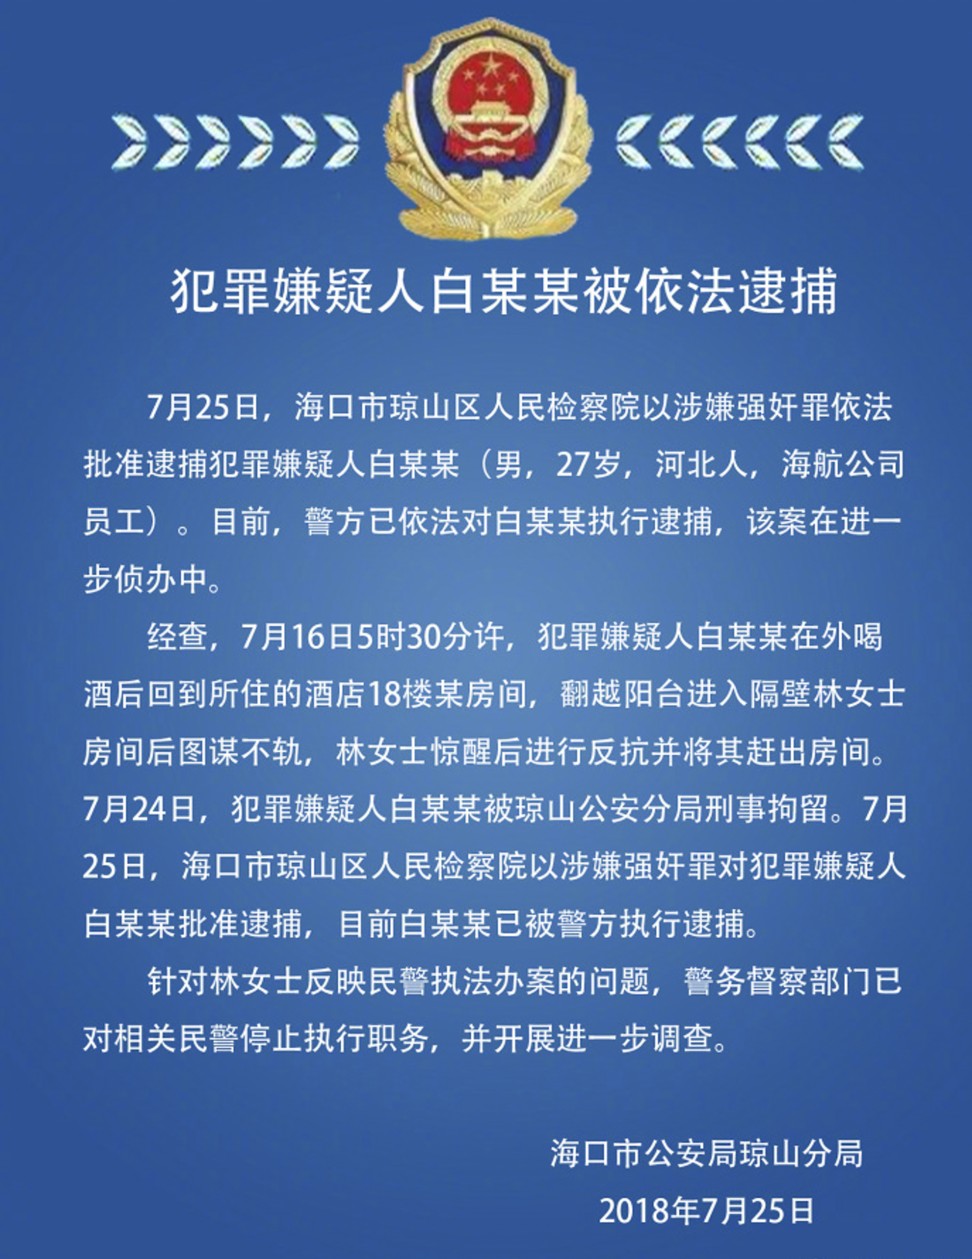 Qiongshan district branch of Haikou city’s public security bureau released a statement saying the officers had been suspended. Photo: Weibo